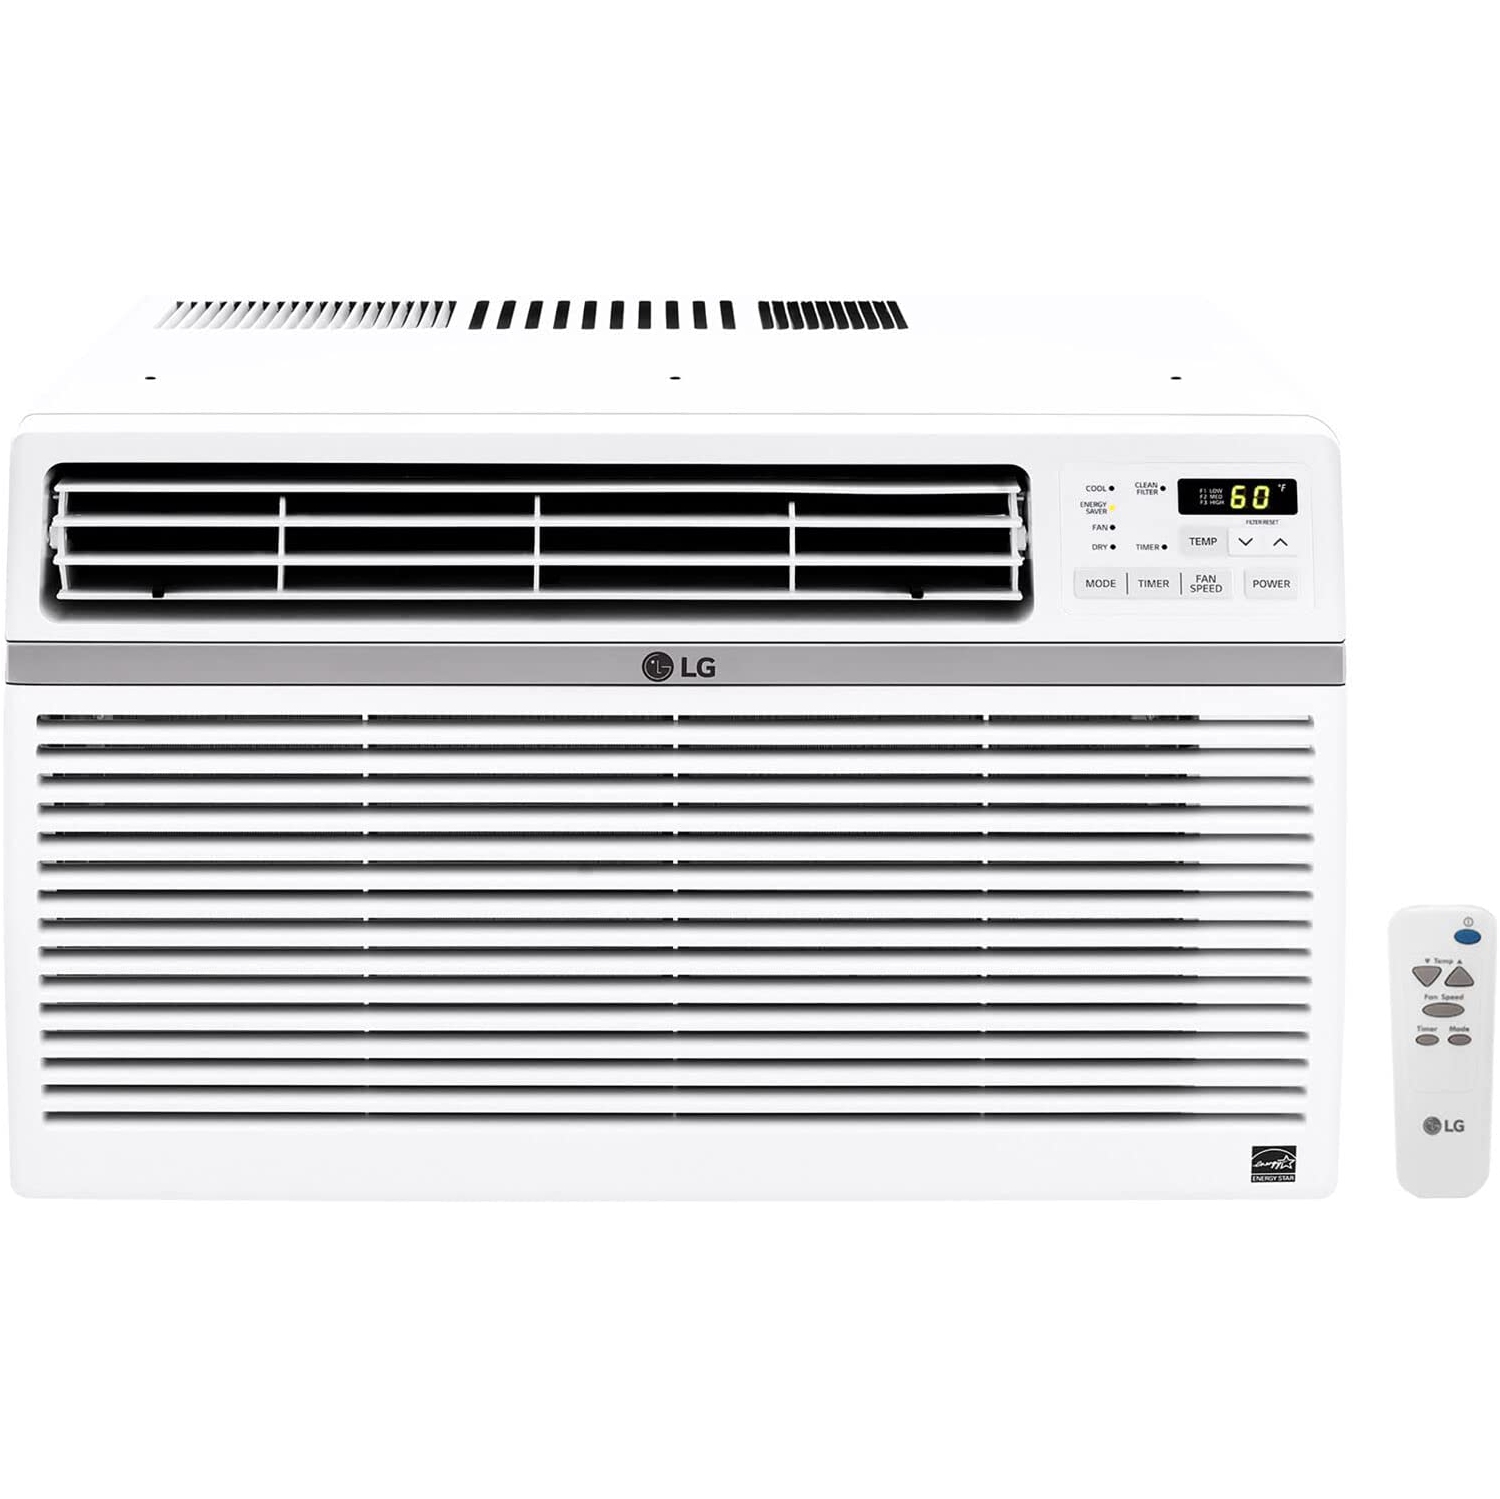 LG 8,000 BTU Window Air Conditioner, Cools 350 Sq.Ft. (14' x 25' Room Size), Quiet Operation, w/ Remote, 3 Cooling & Fan Speeds, Energy Star, Auto Restart, 115V, White (LW8016ER)